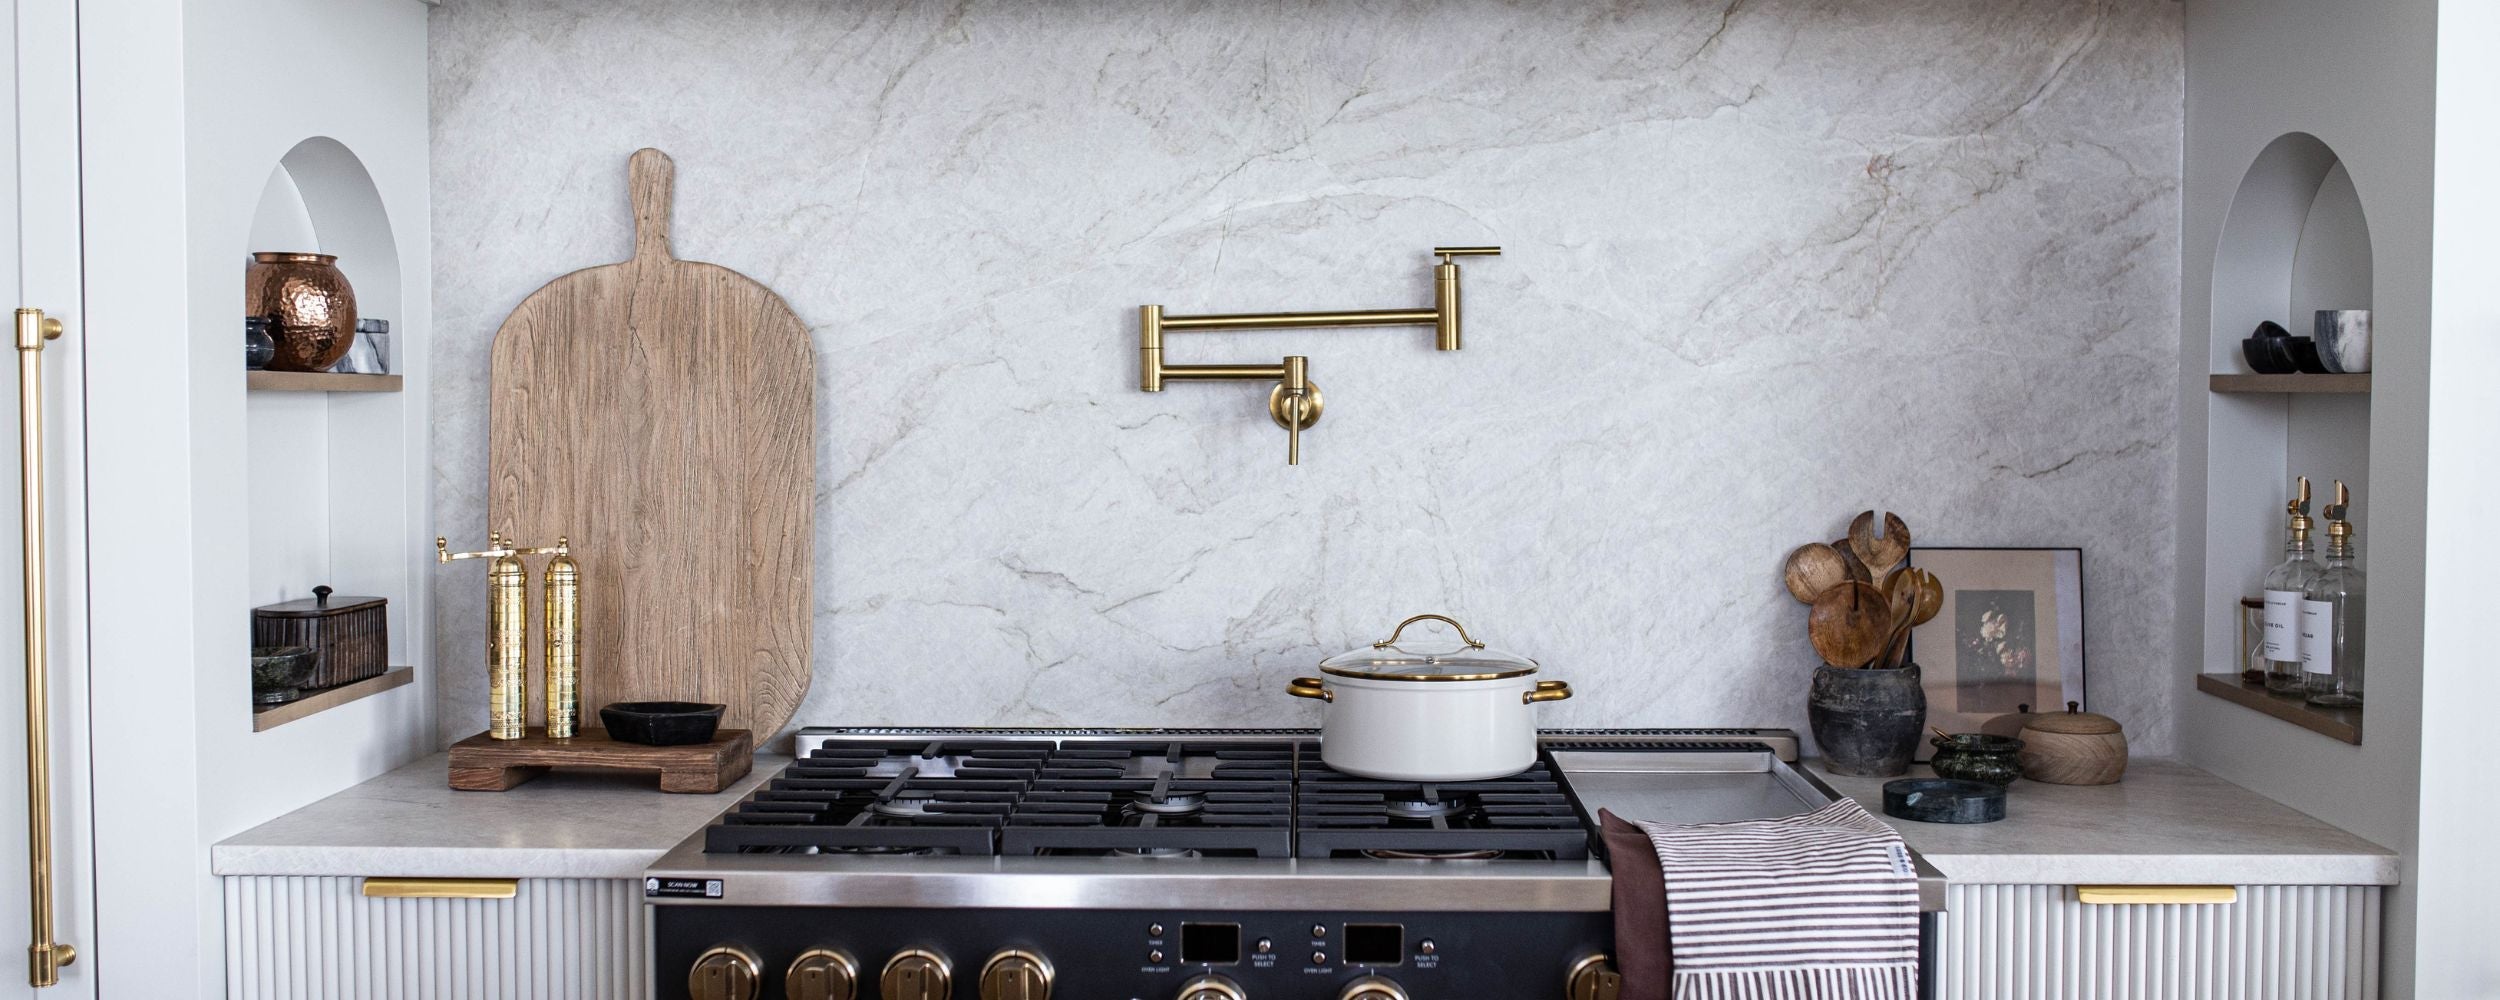 Vintage Modern Kitchen Styled by Luxe B Co.